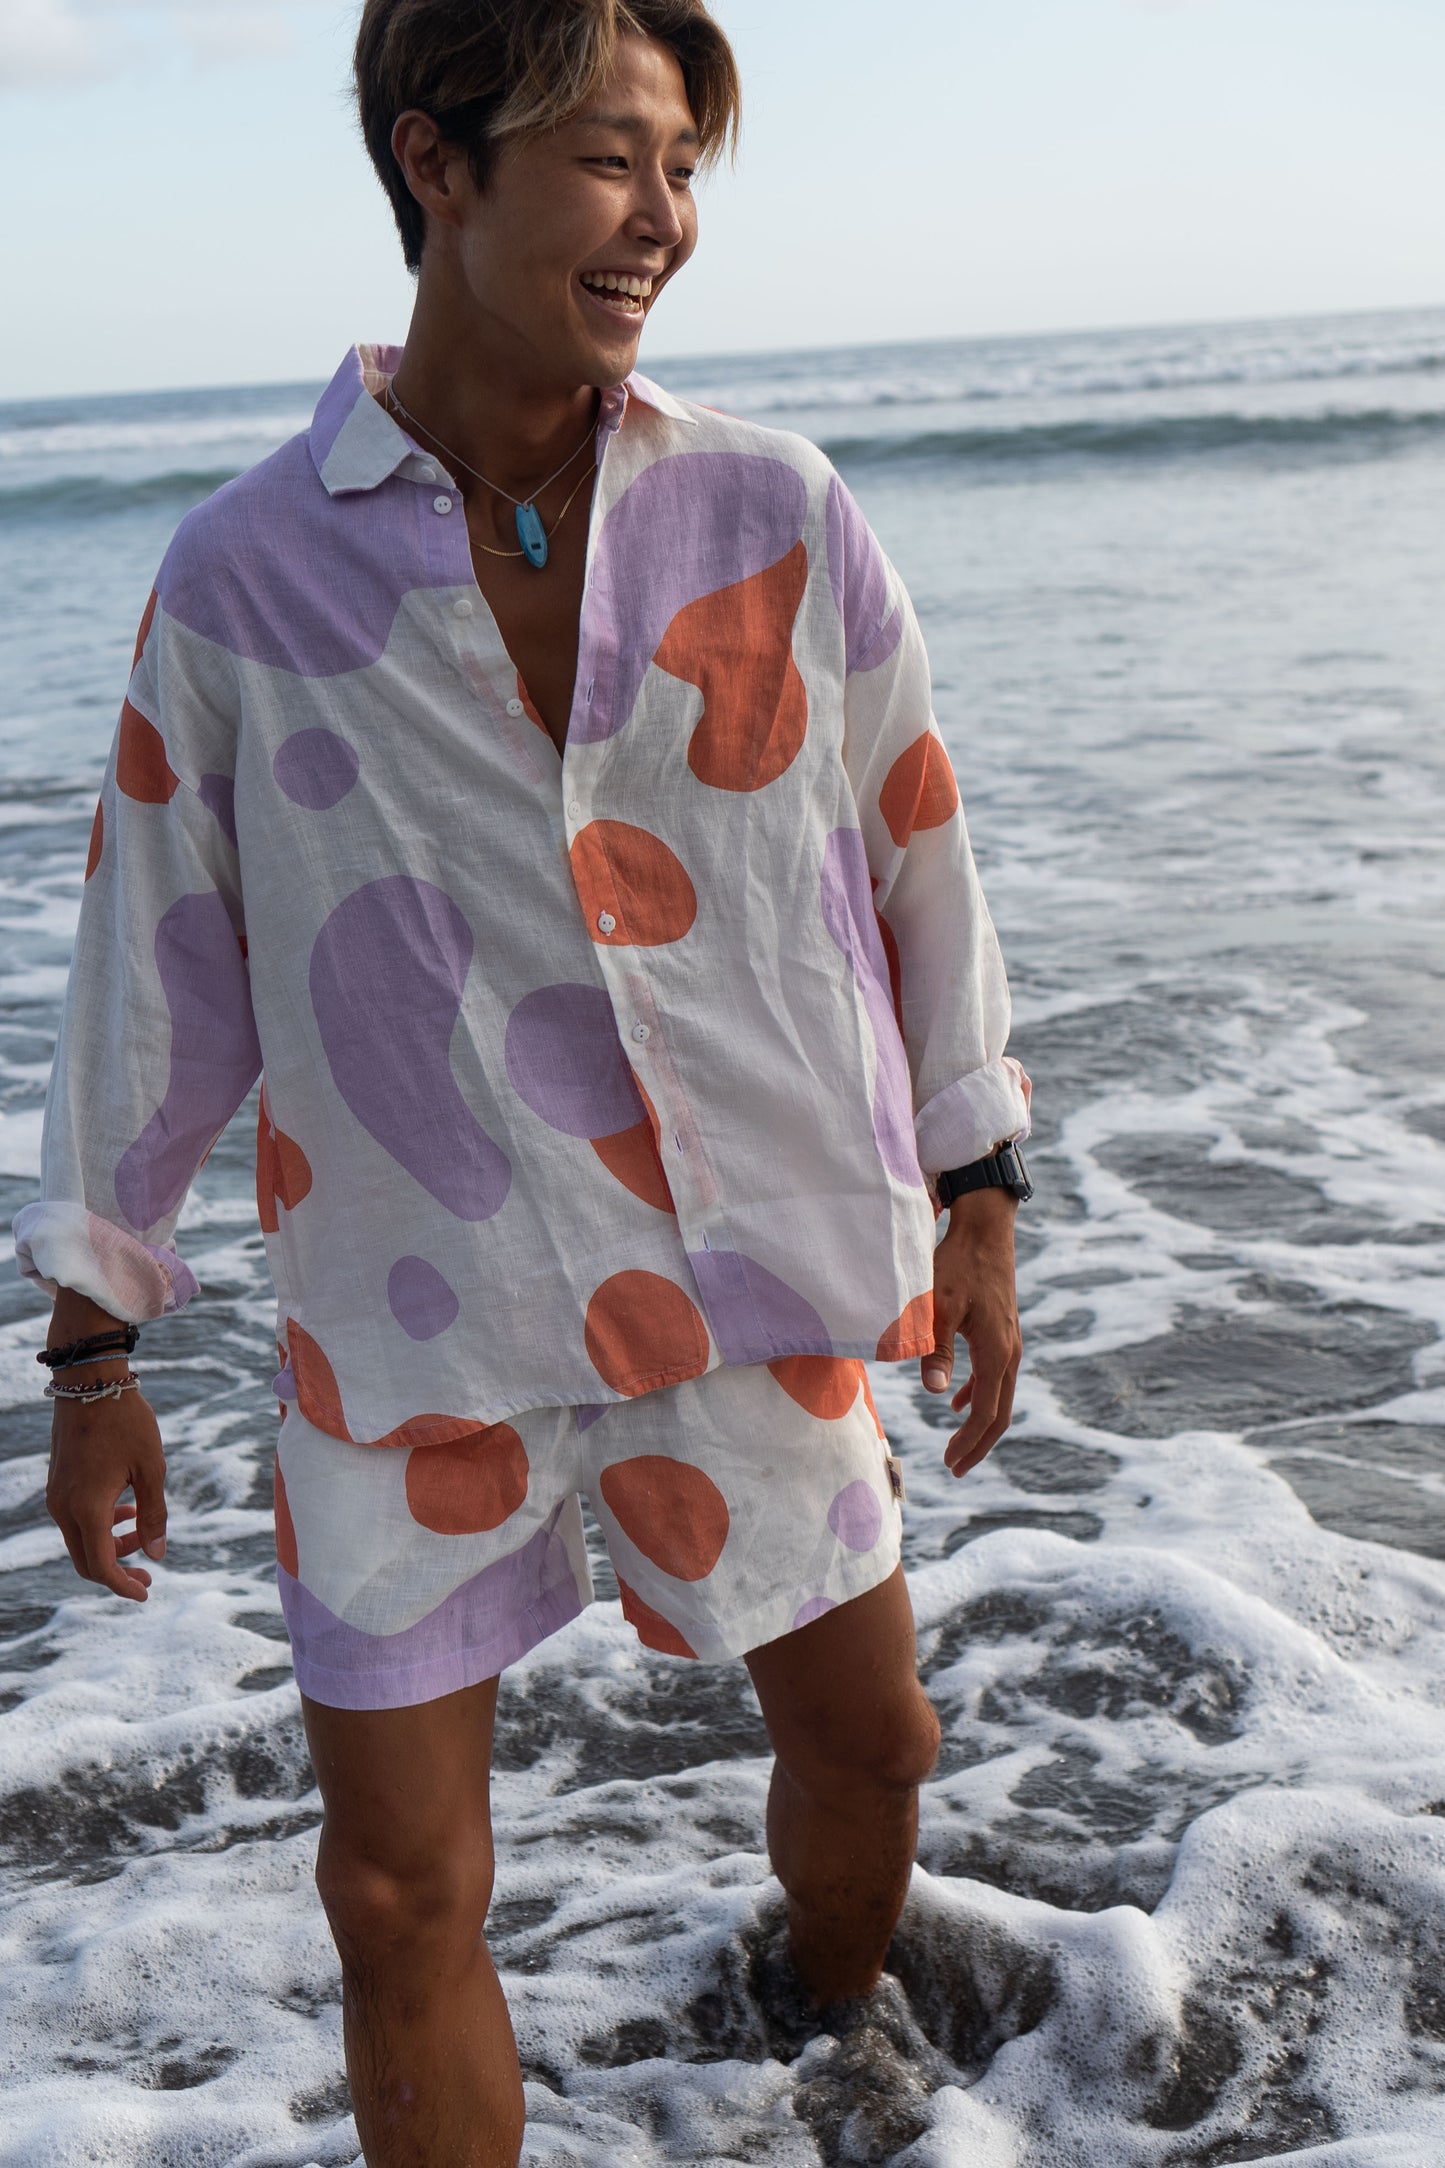 Colorful linen shirt and shorts - candy